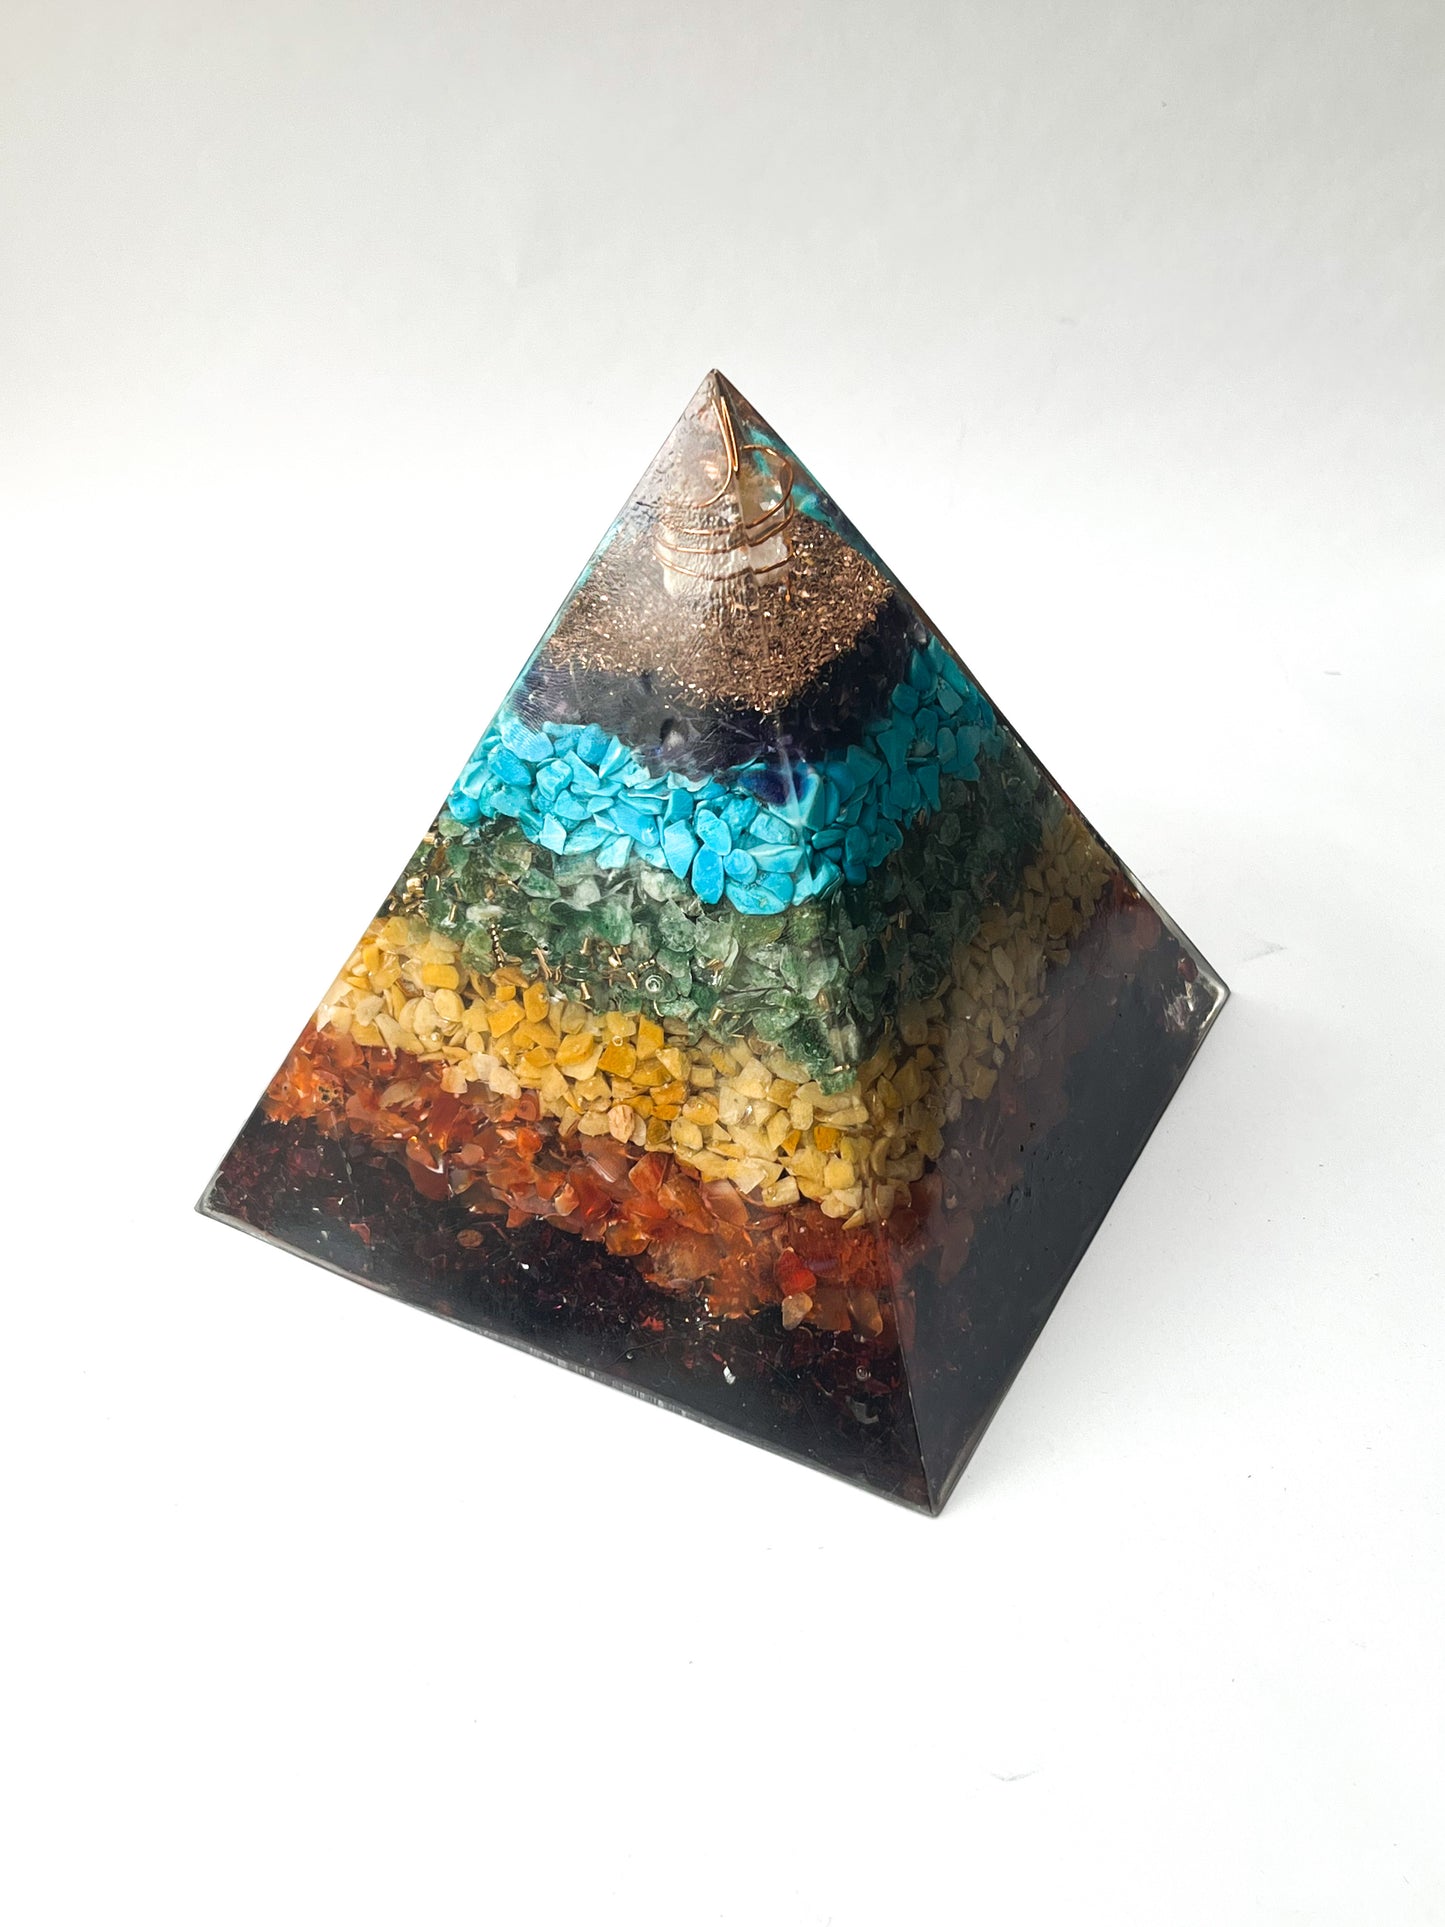 Large Orgonite Pyramid 15cm in Height - 7 Chakras